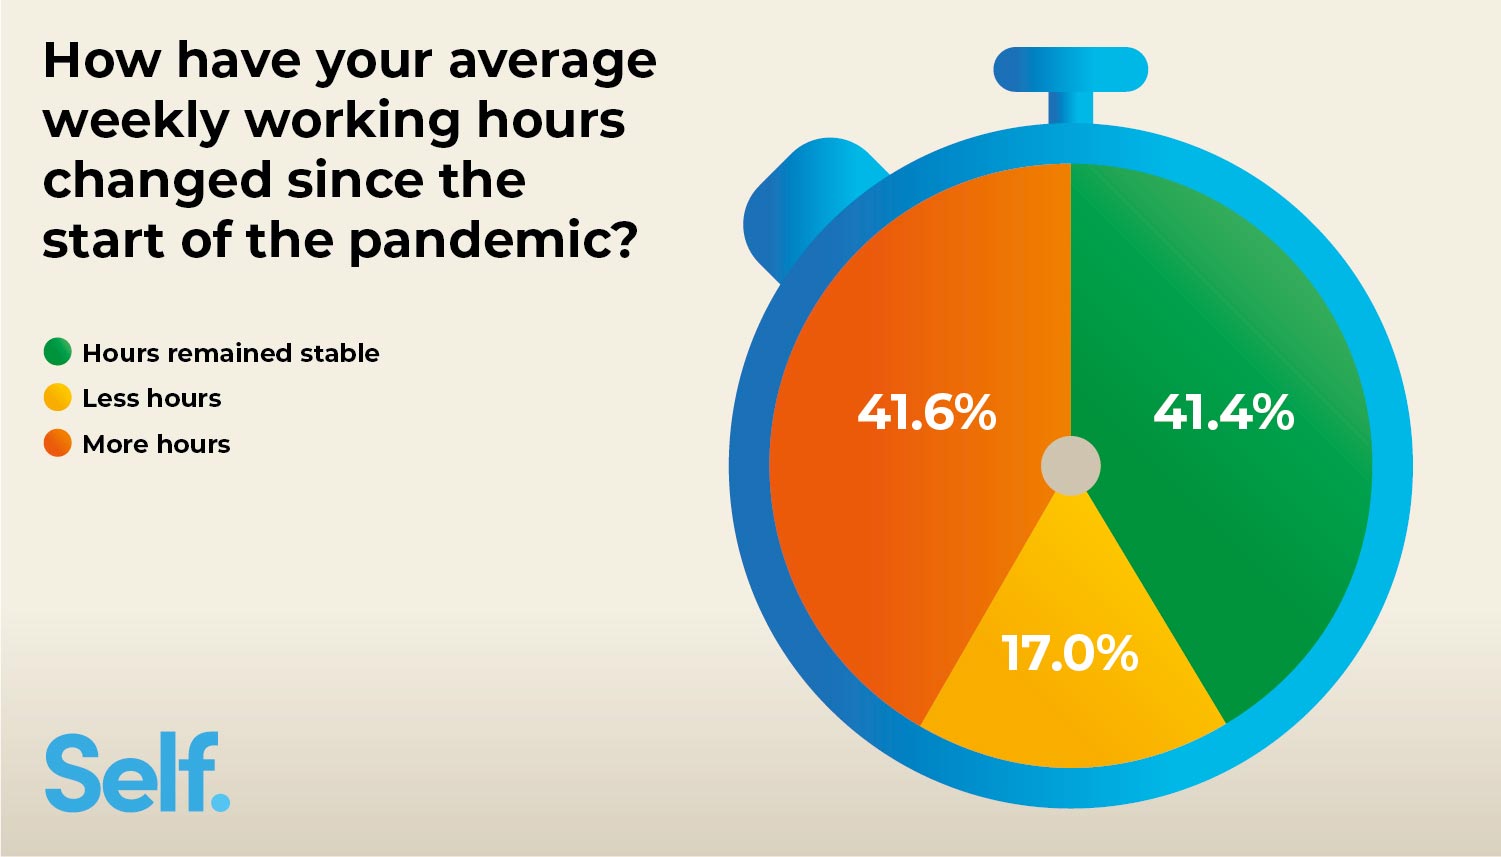 How have your average weekly working hours changed since the start of the pandemic?